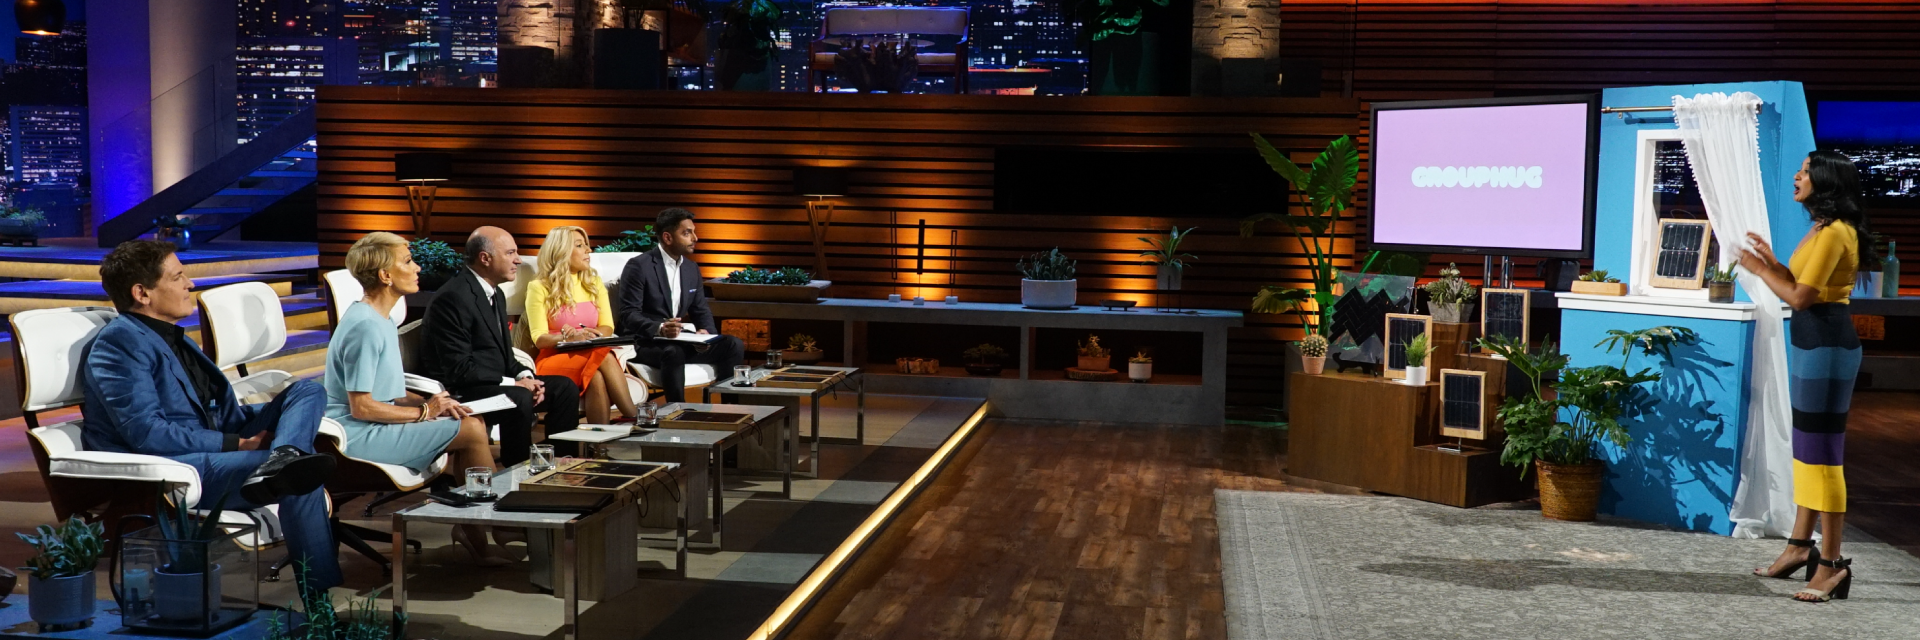 Grouphug founder and Georgia Tech Alum Krystal Persaud appeared on an episode of ABC’s Shark Tank.